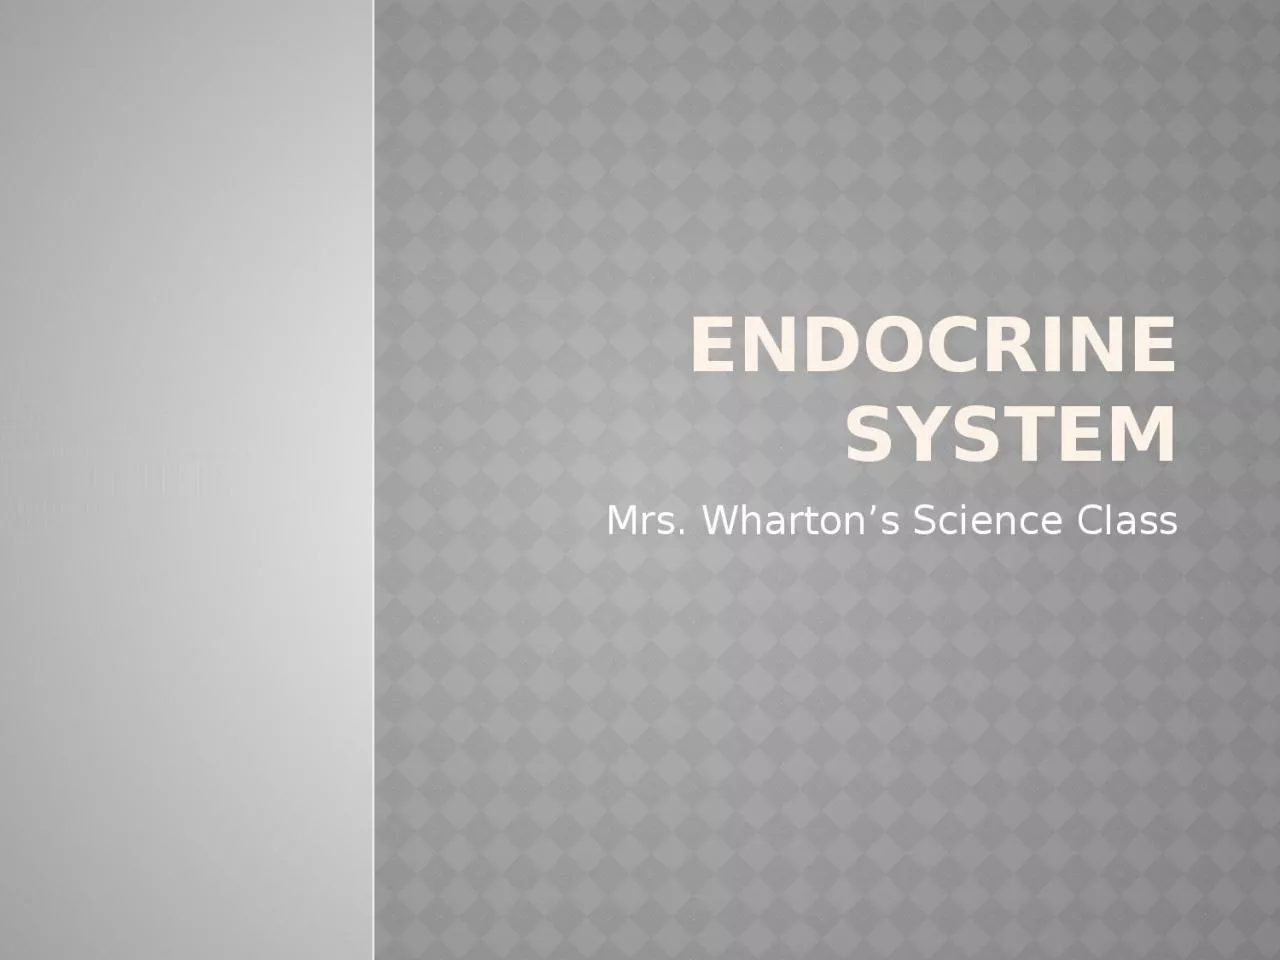 Endocrine System Mrs. Wharton’s Science Class